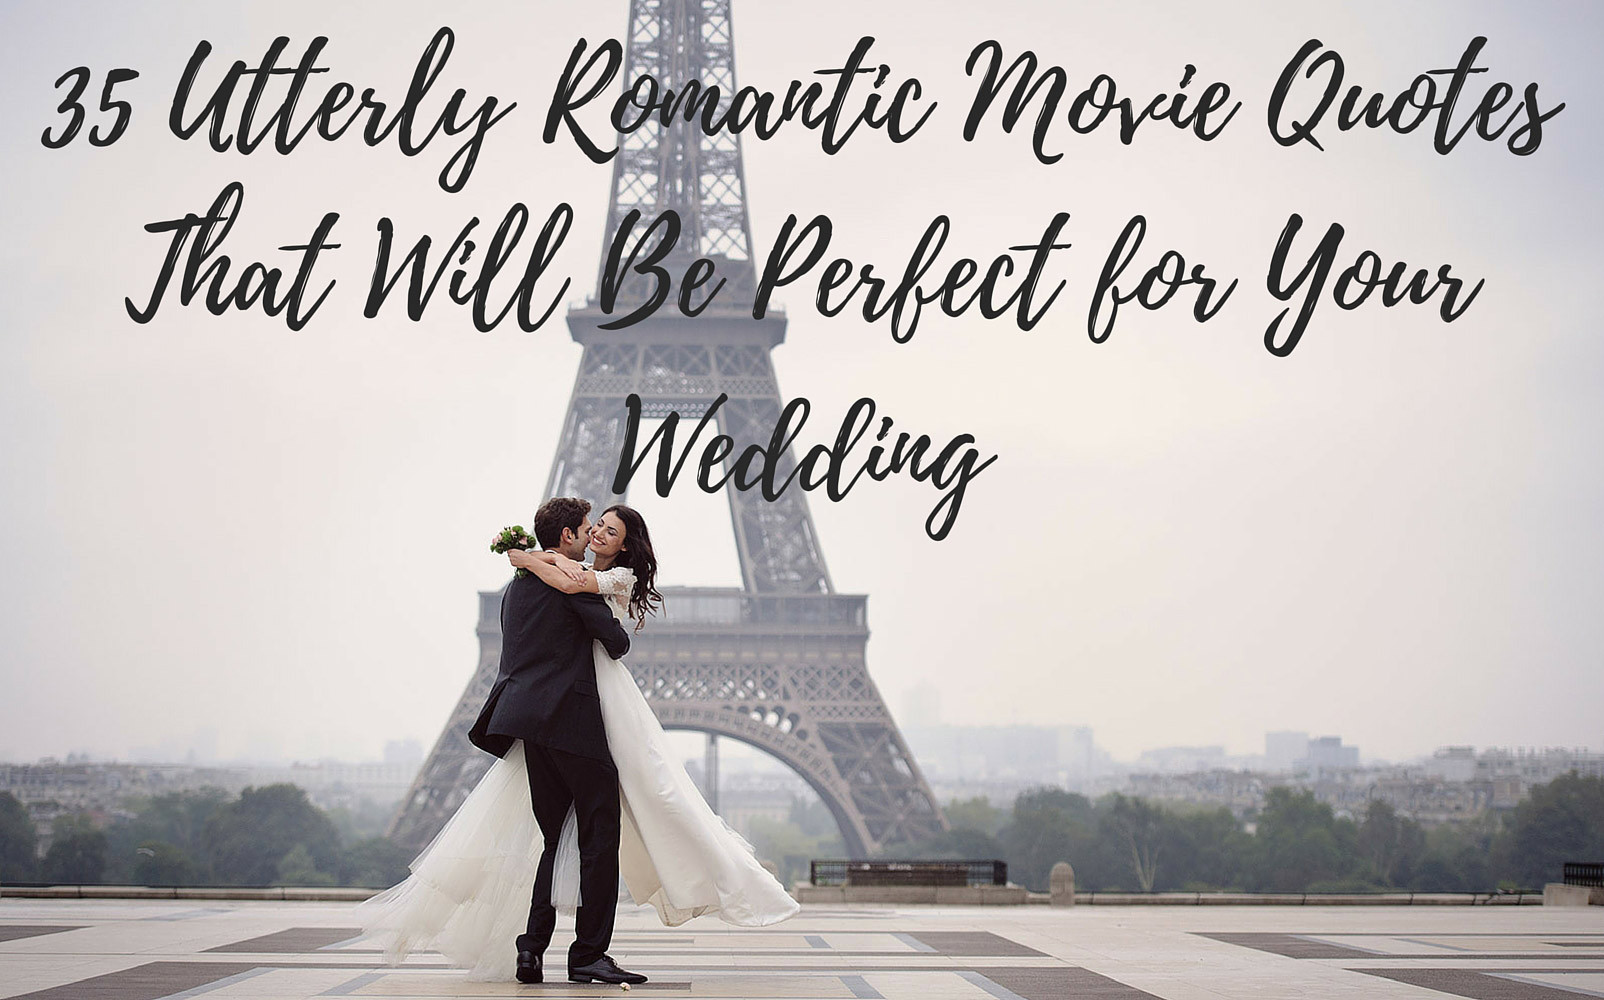 Romantic Movie Quotes
 Utterly Romantic Quotes from Movies